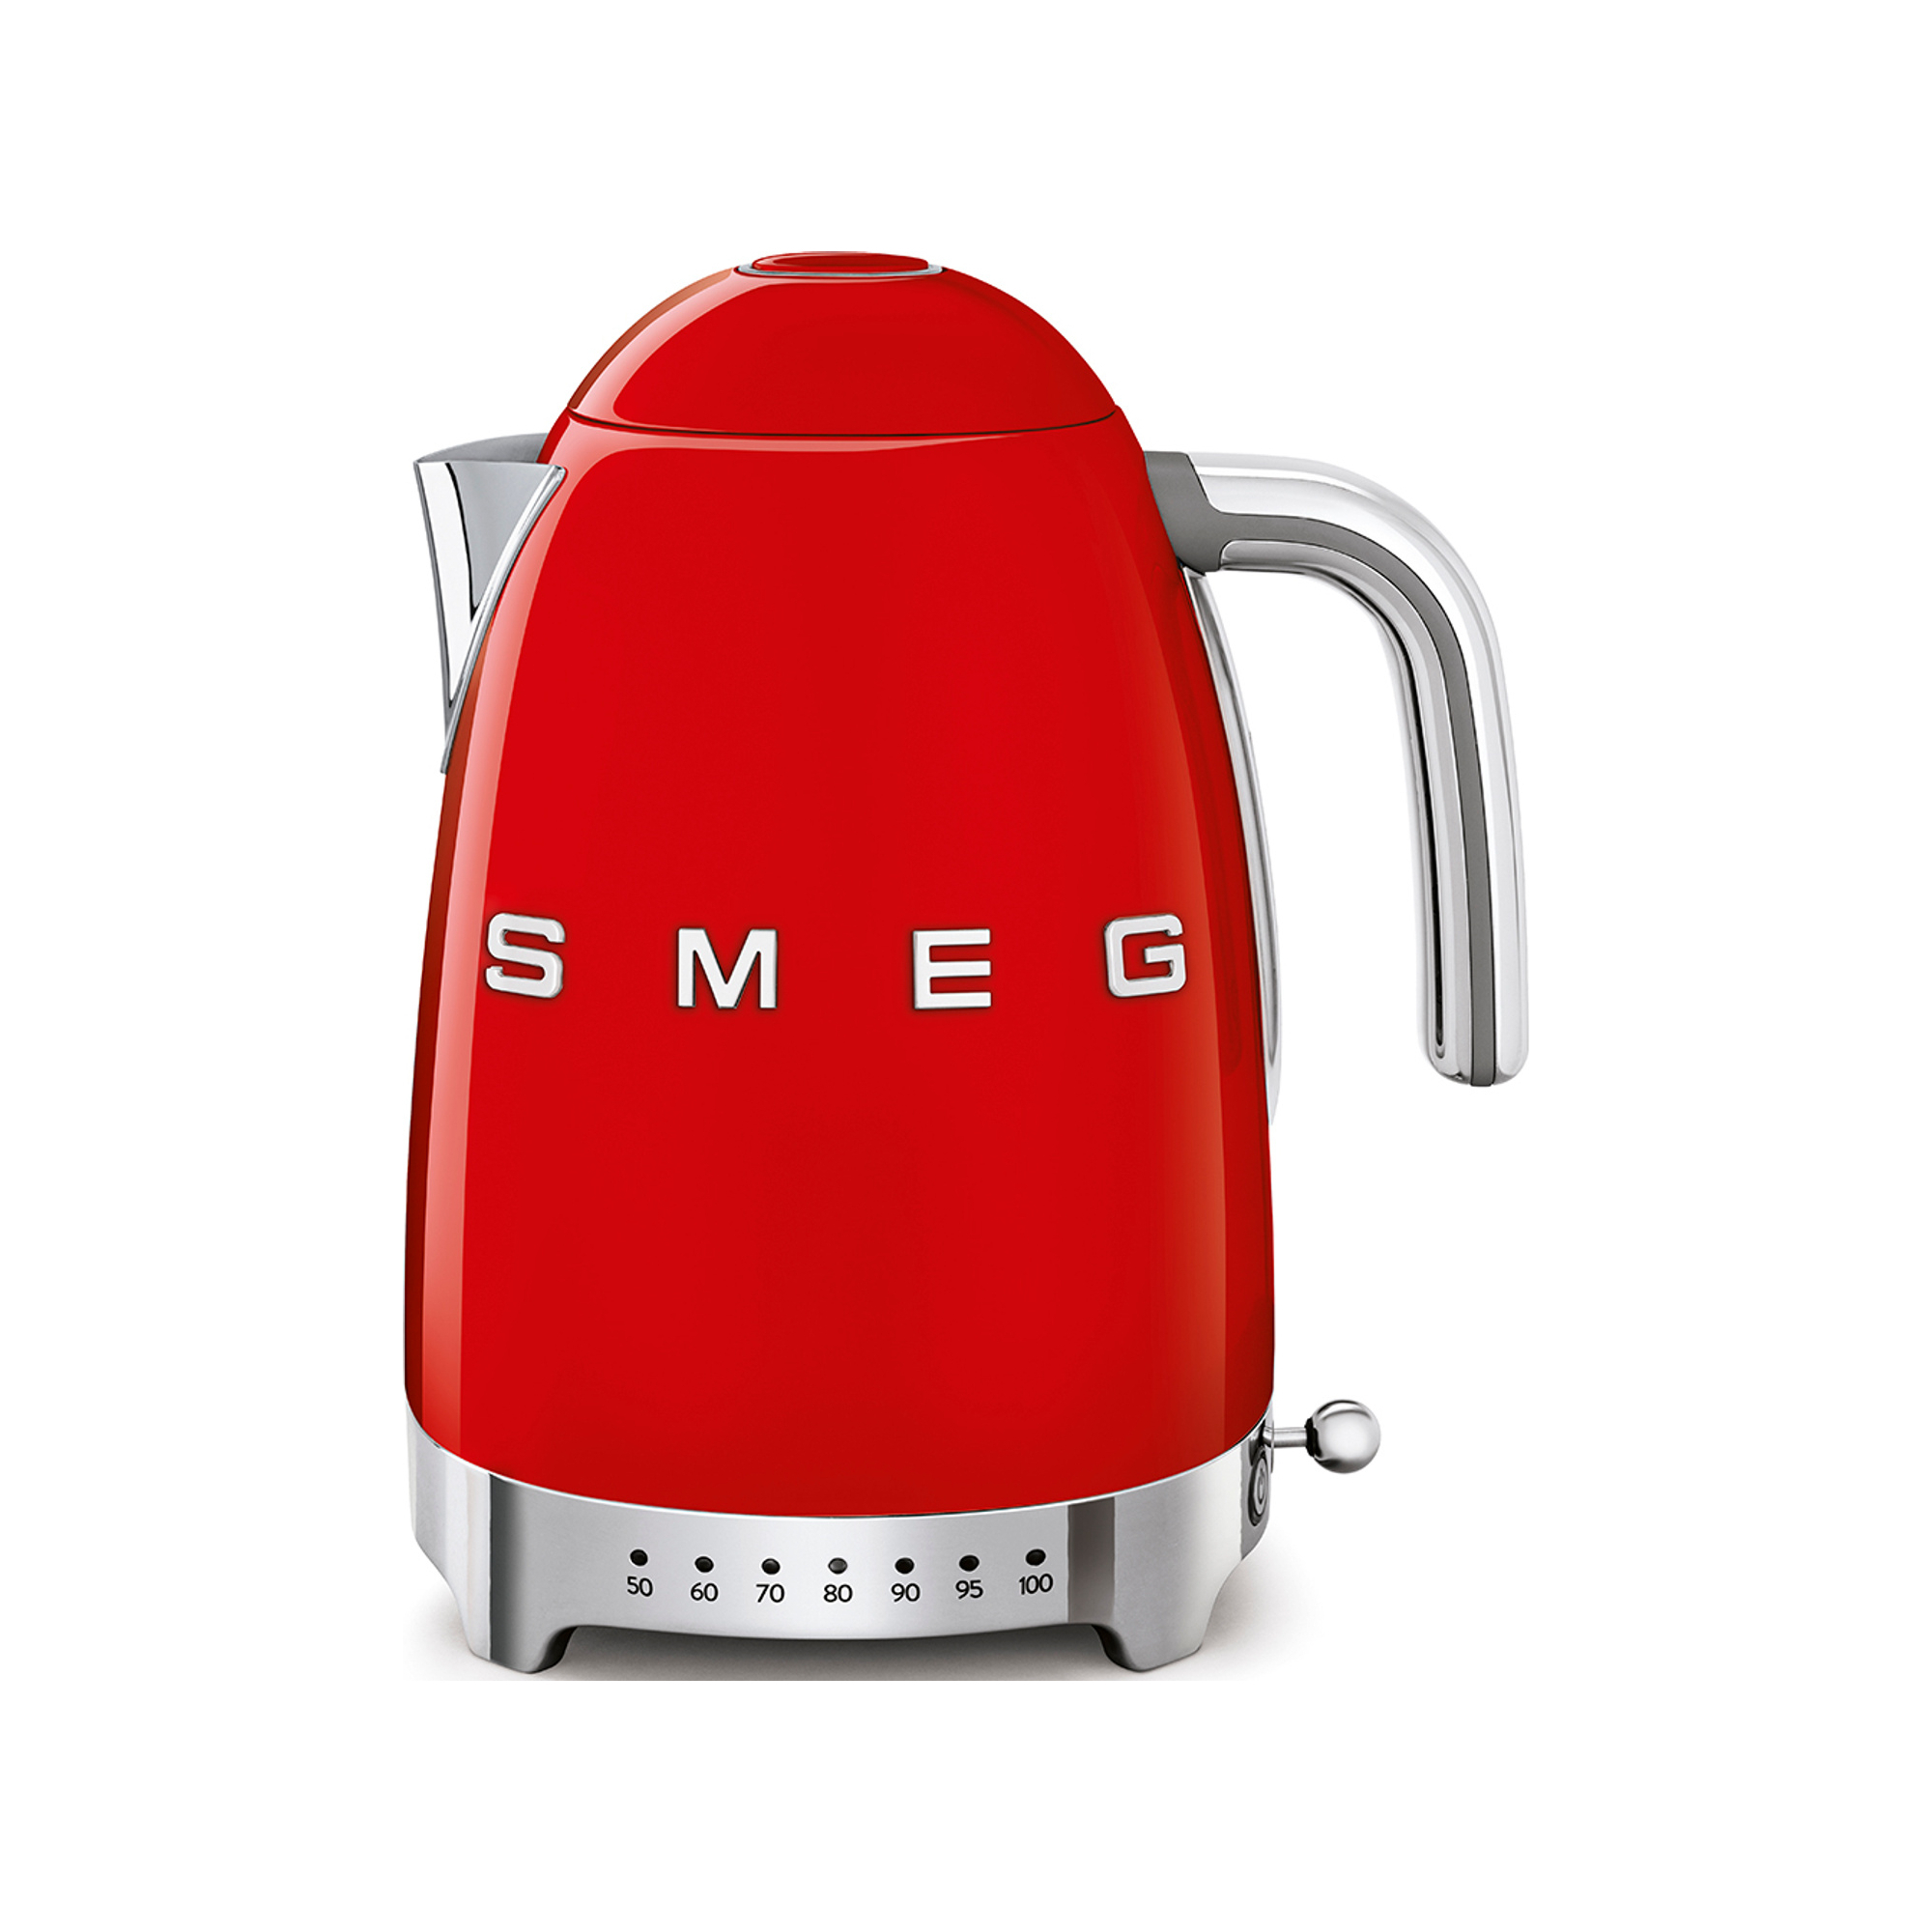 Smeg 50's Retro Style 1.7l Electric Variable Kettle - Red